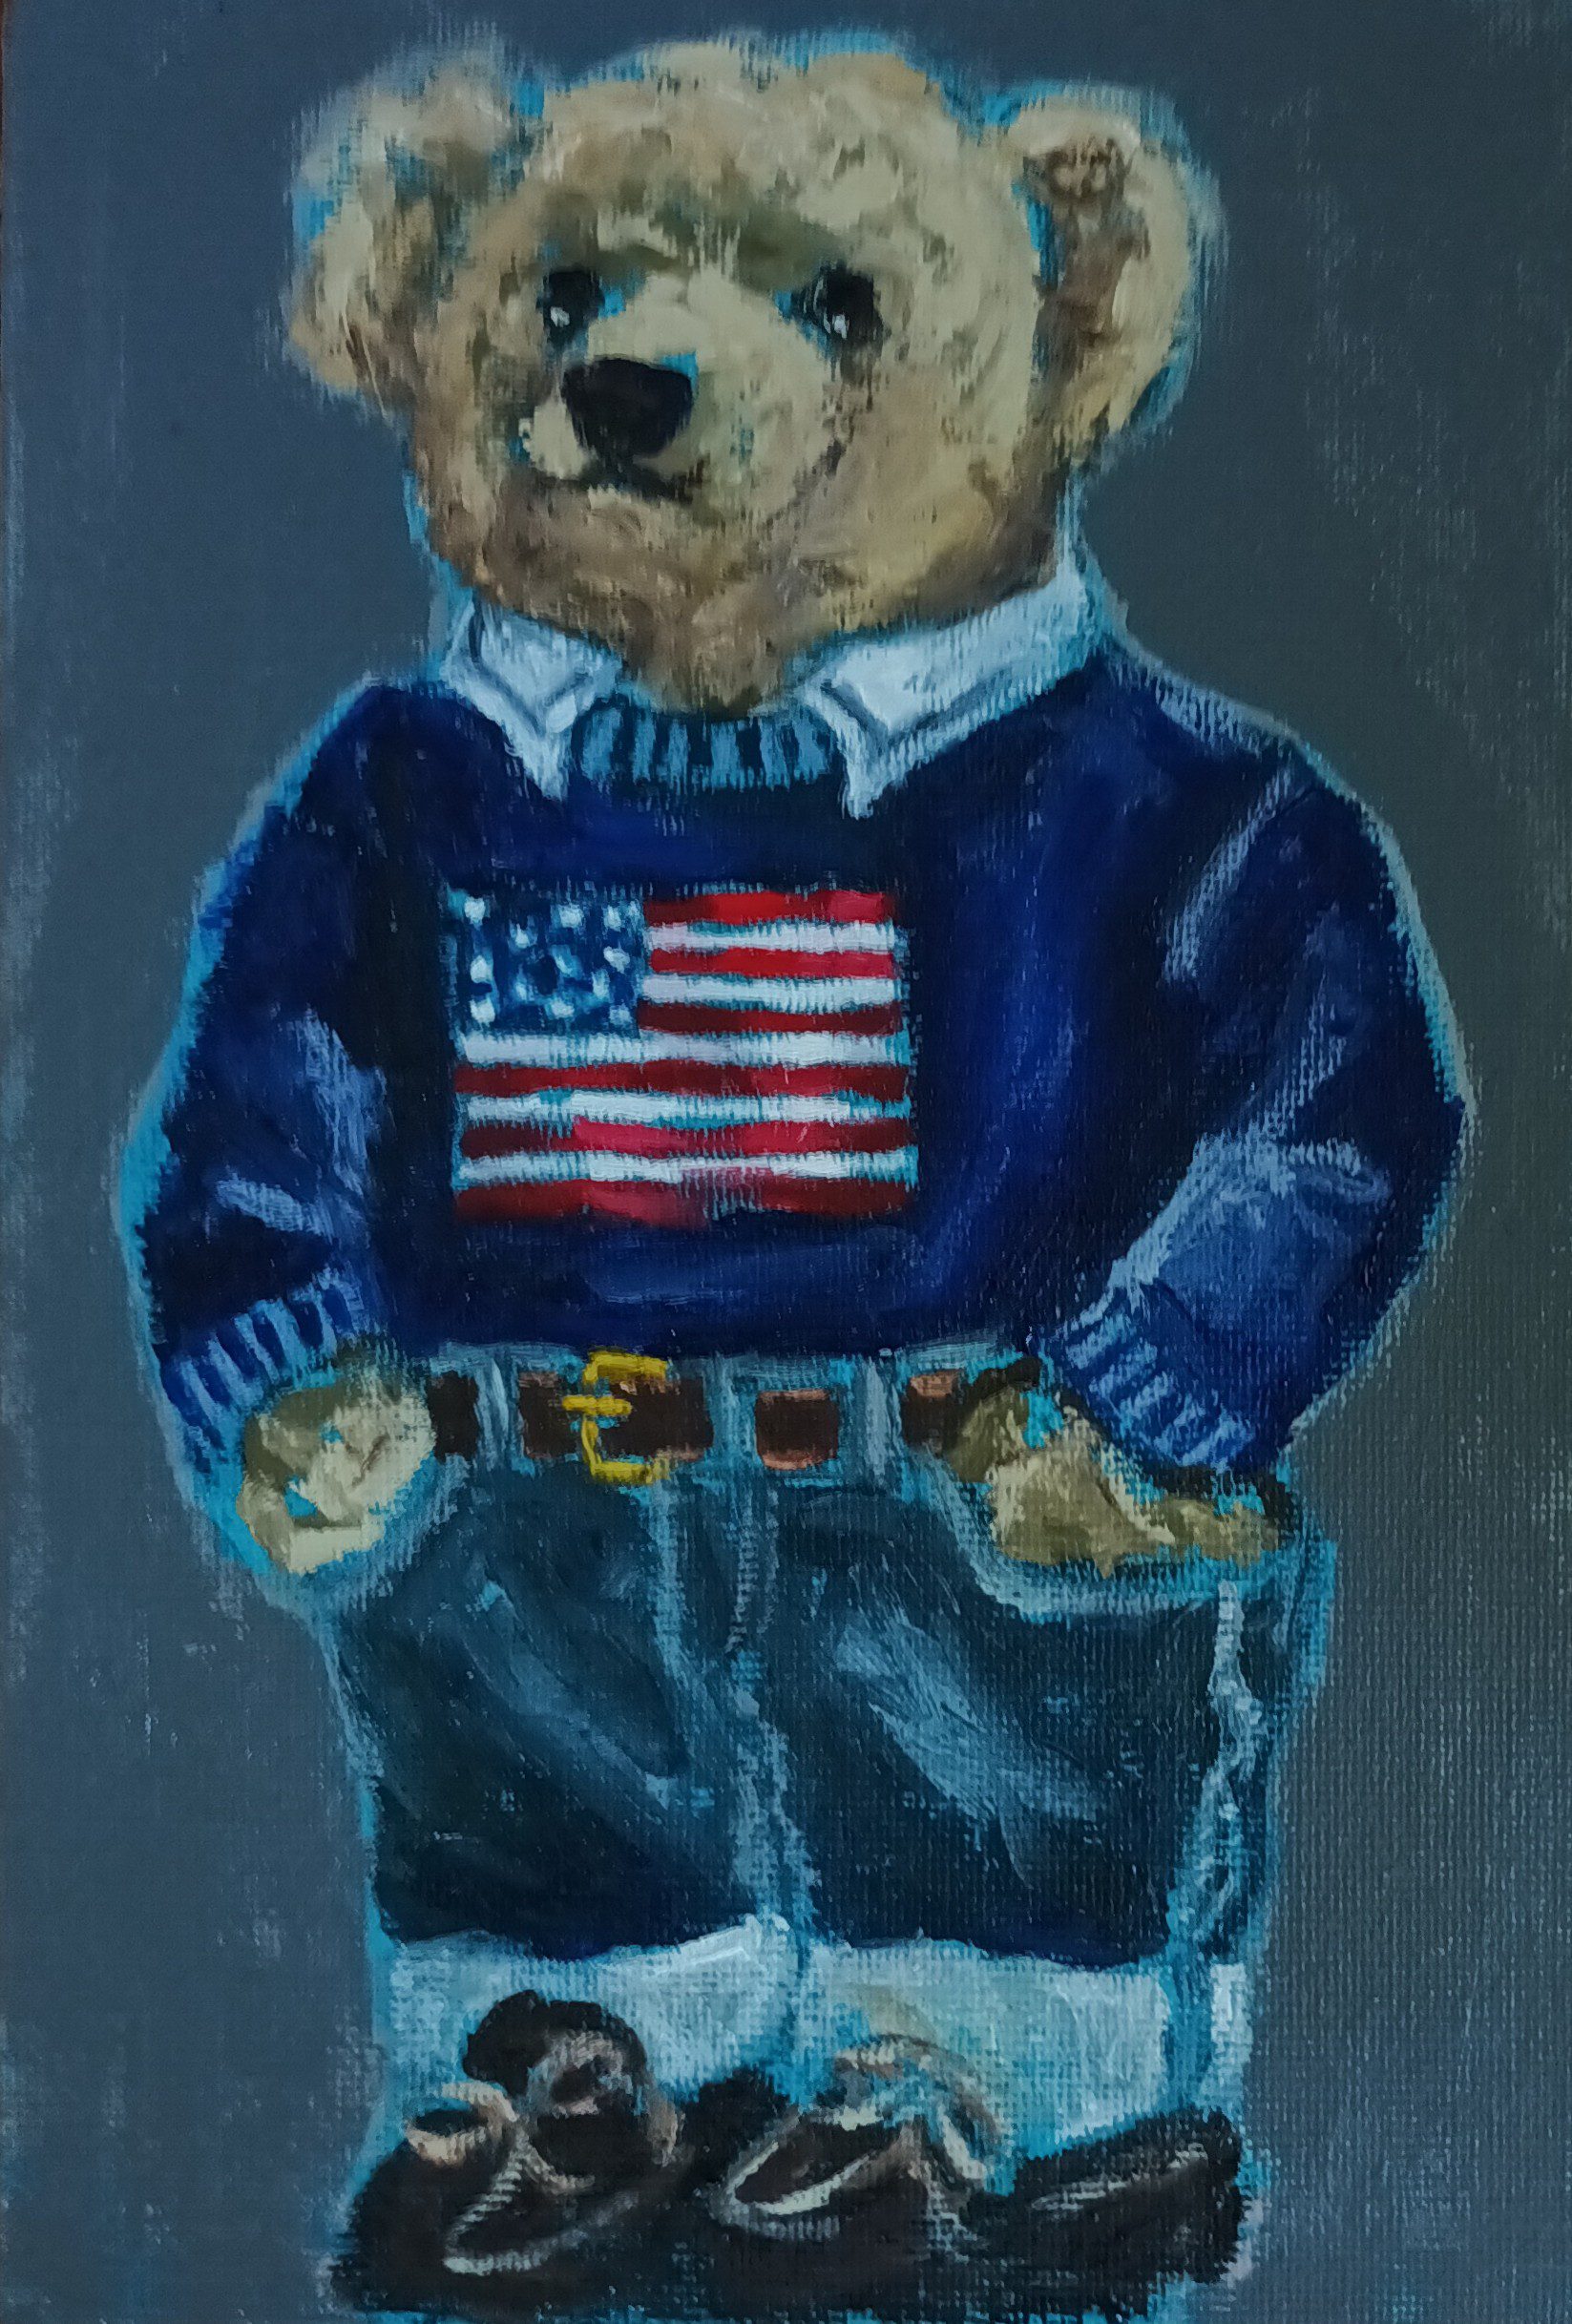 Boy teddy bear dressed up in jeans and sweater